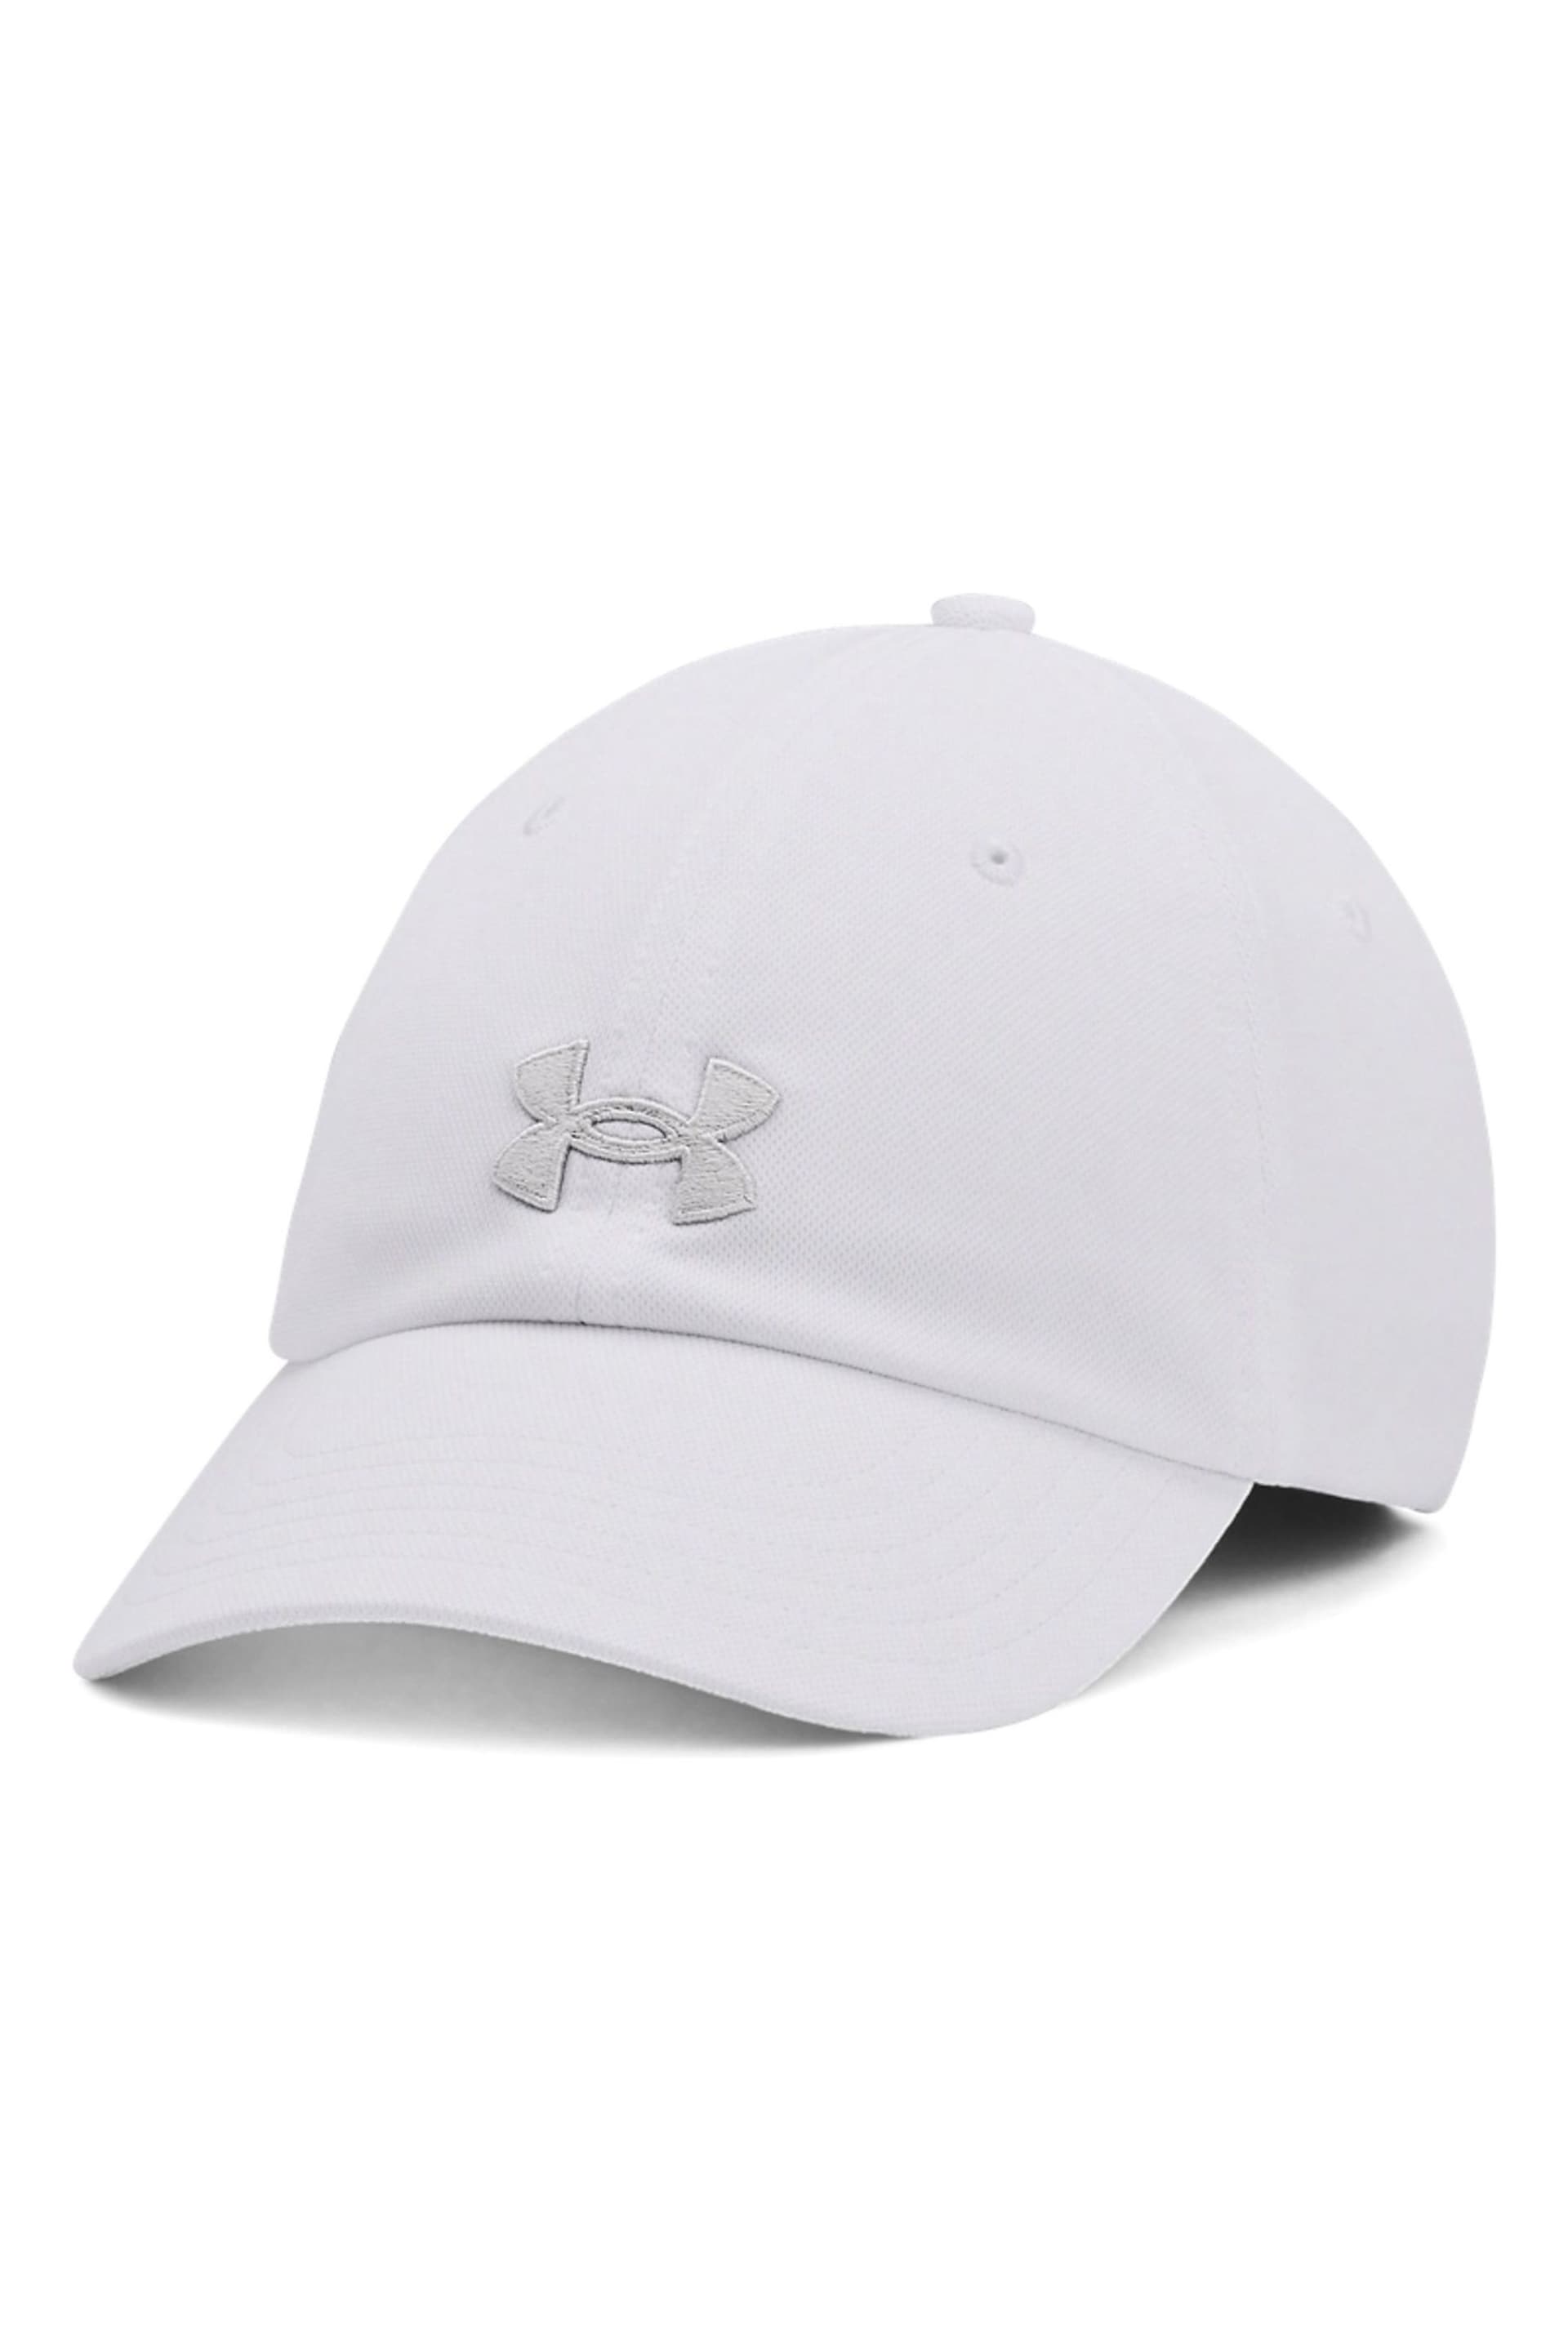 Under Armour White Blitzing Adjustable Cap - Image 1 of 3